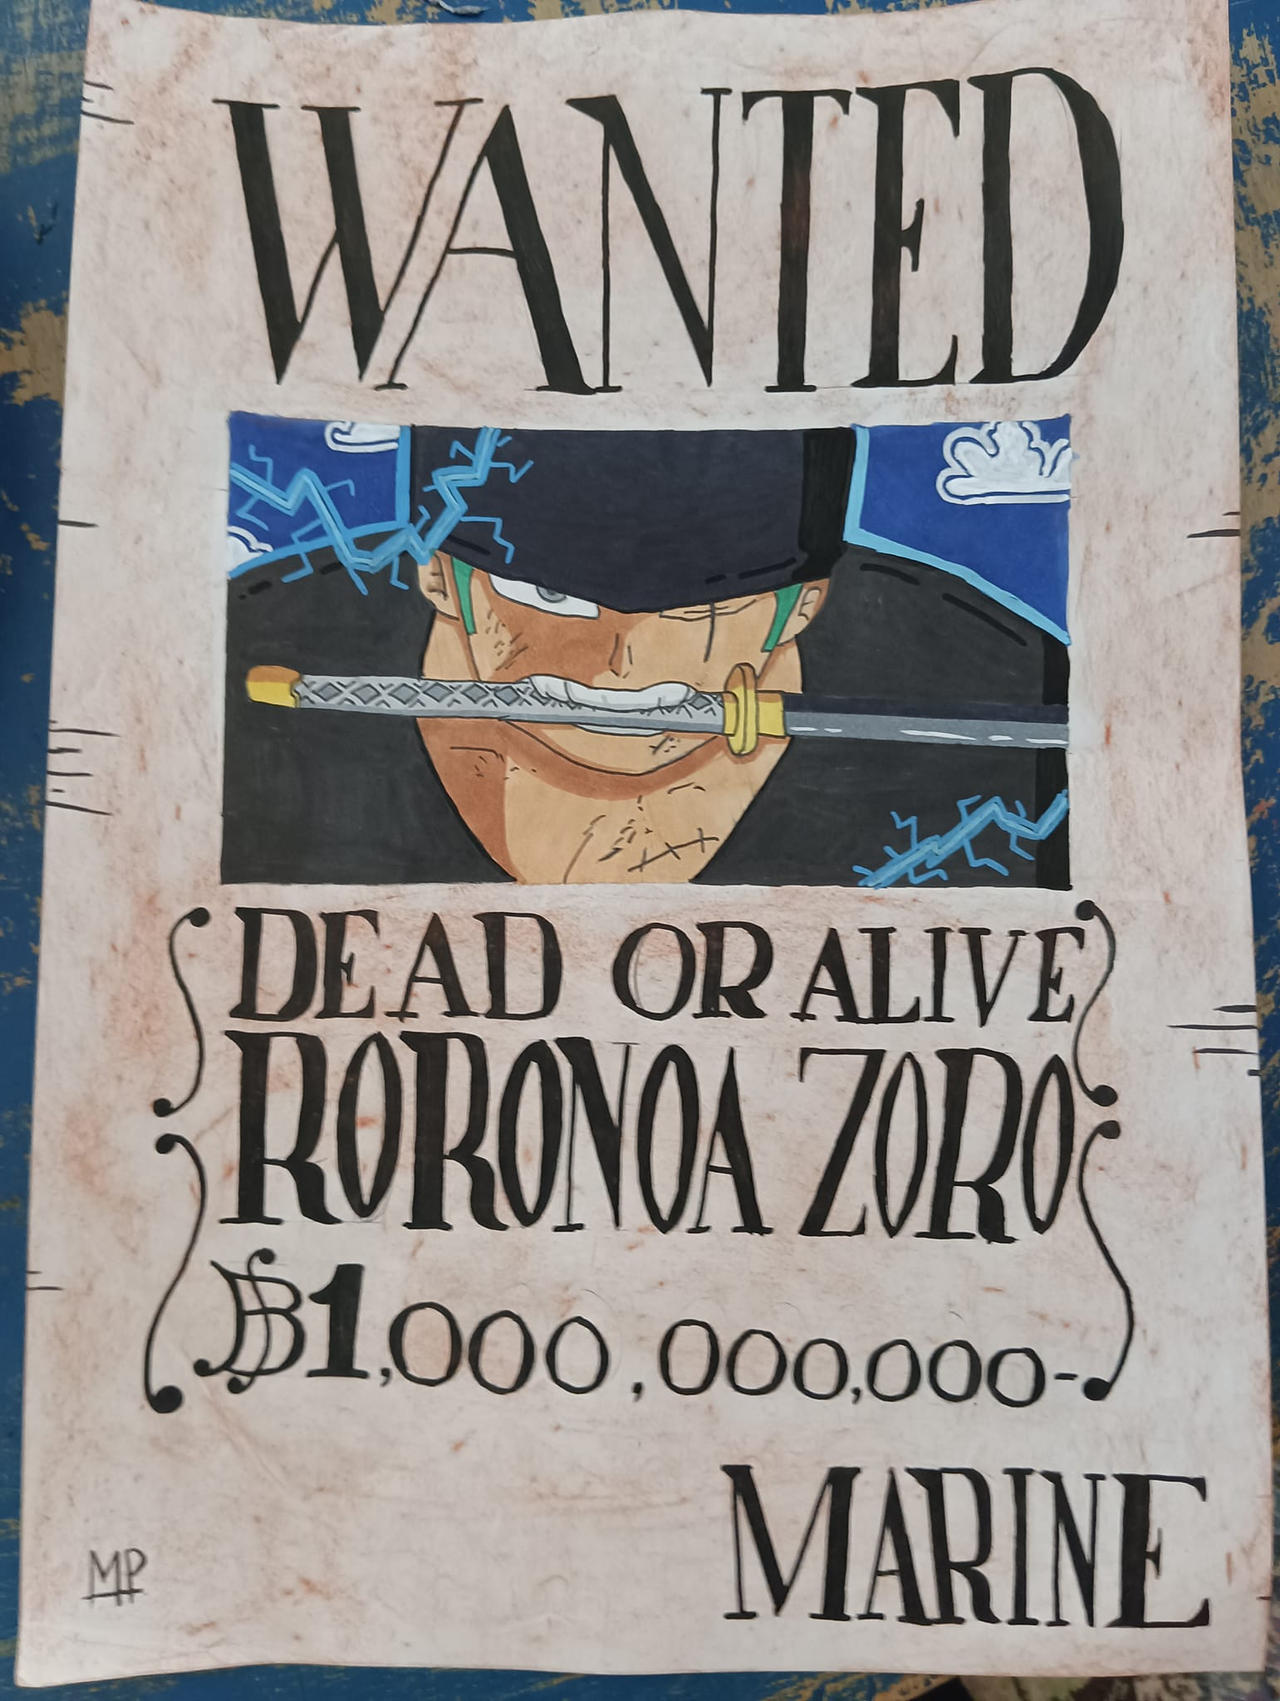 All One Piece Wanted Posters by KarinandKenta4ever on DeviantArt